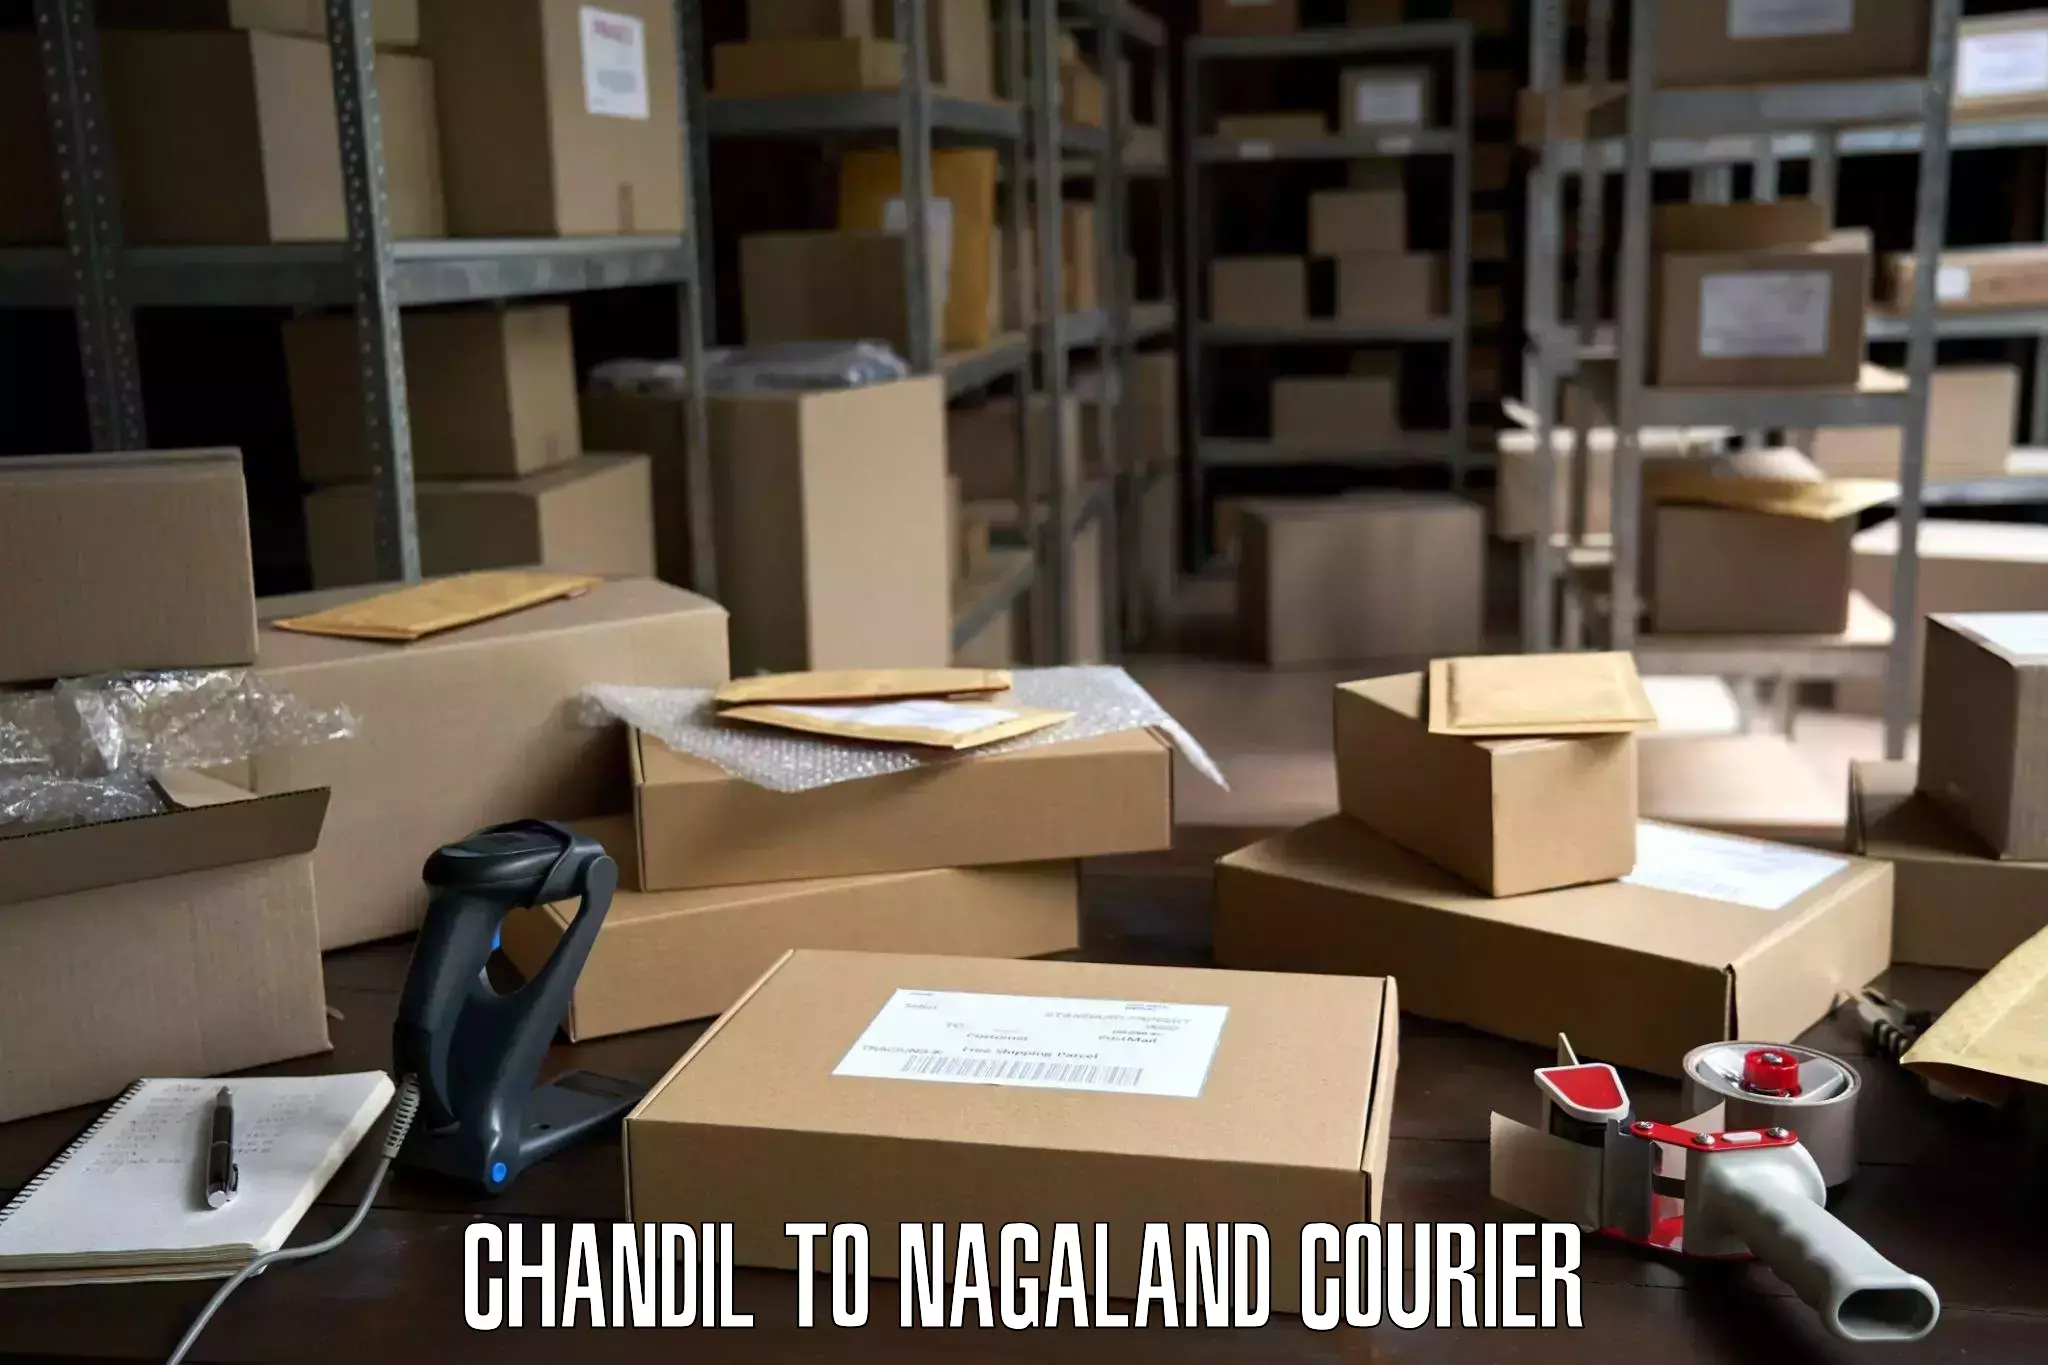 Household goods transport service Chandil to Nagaland